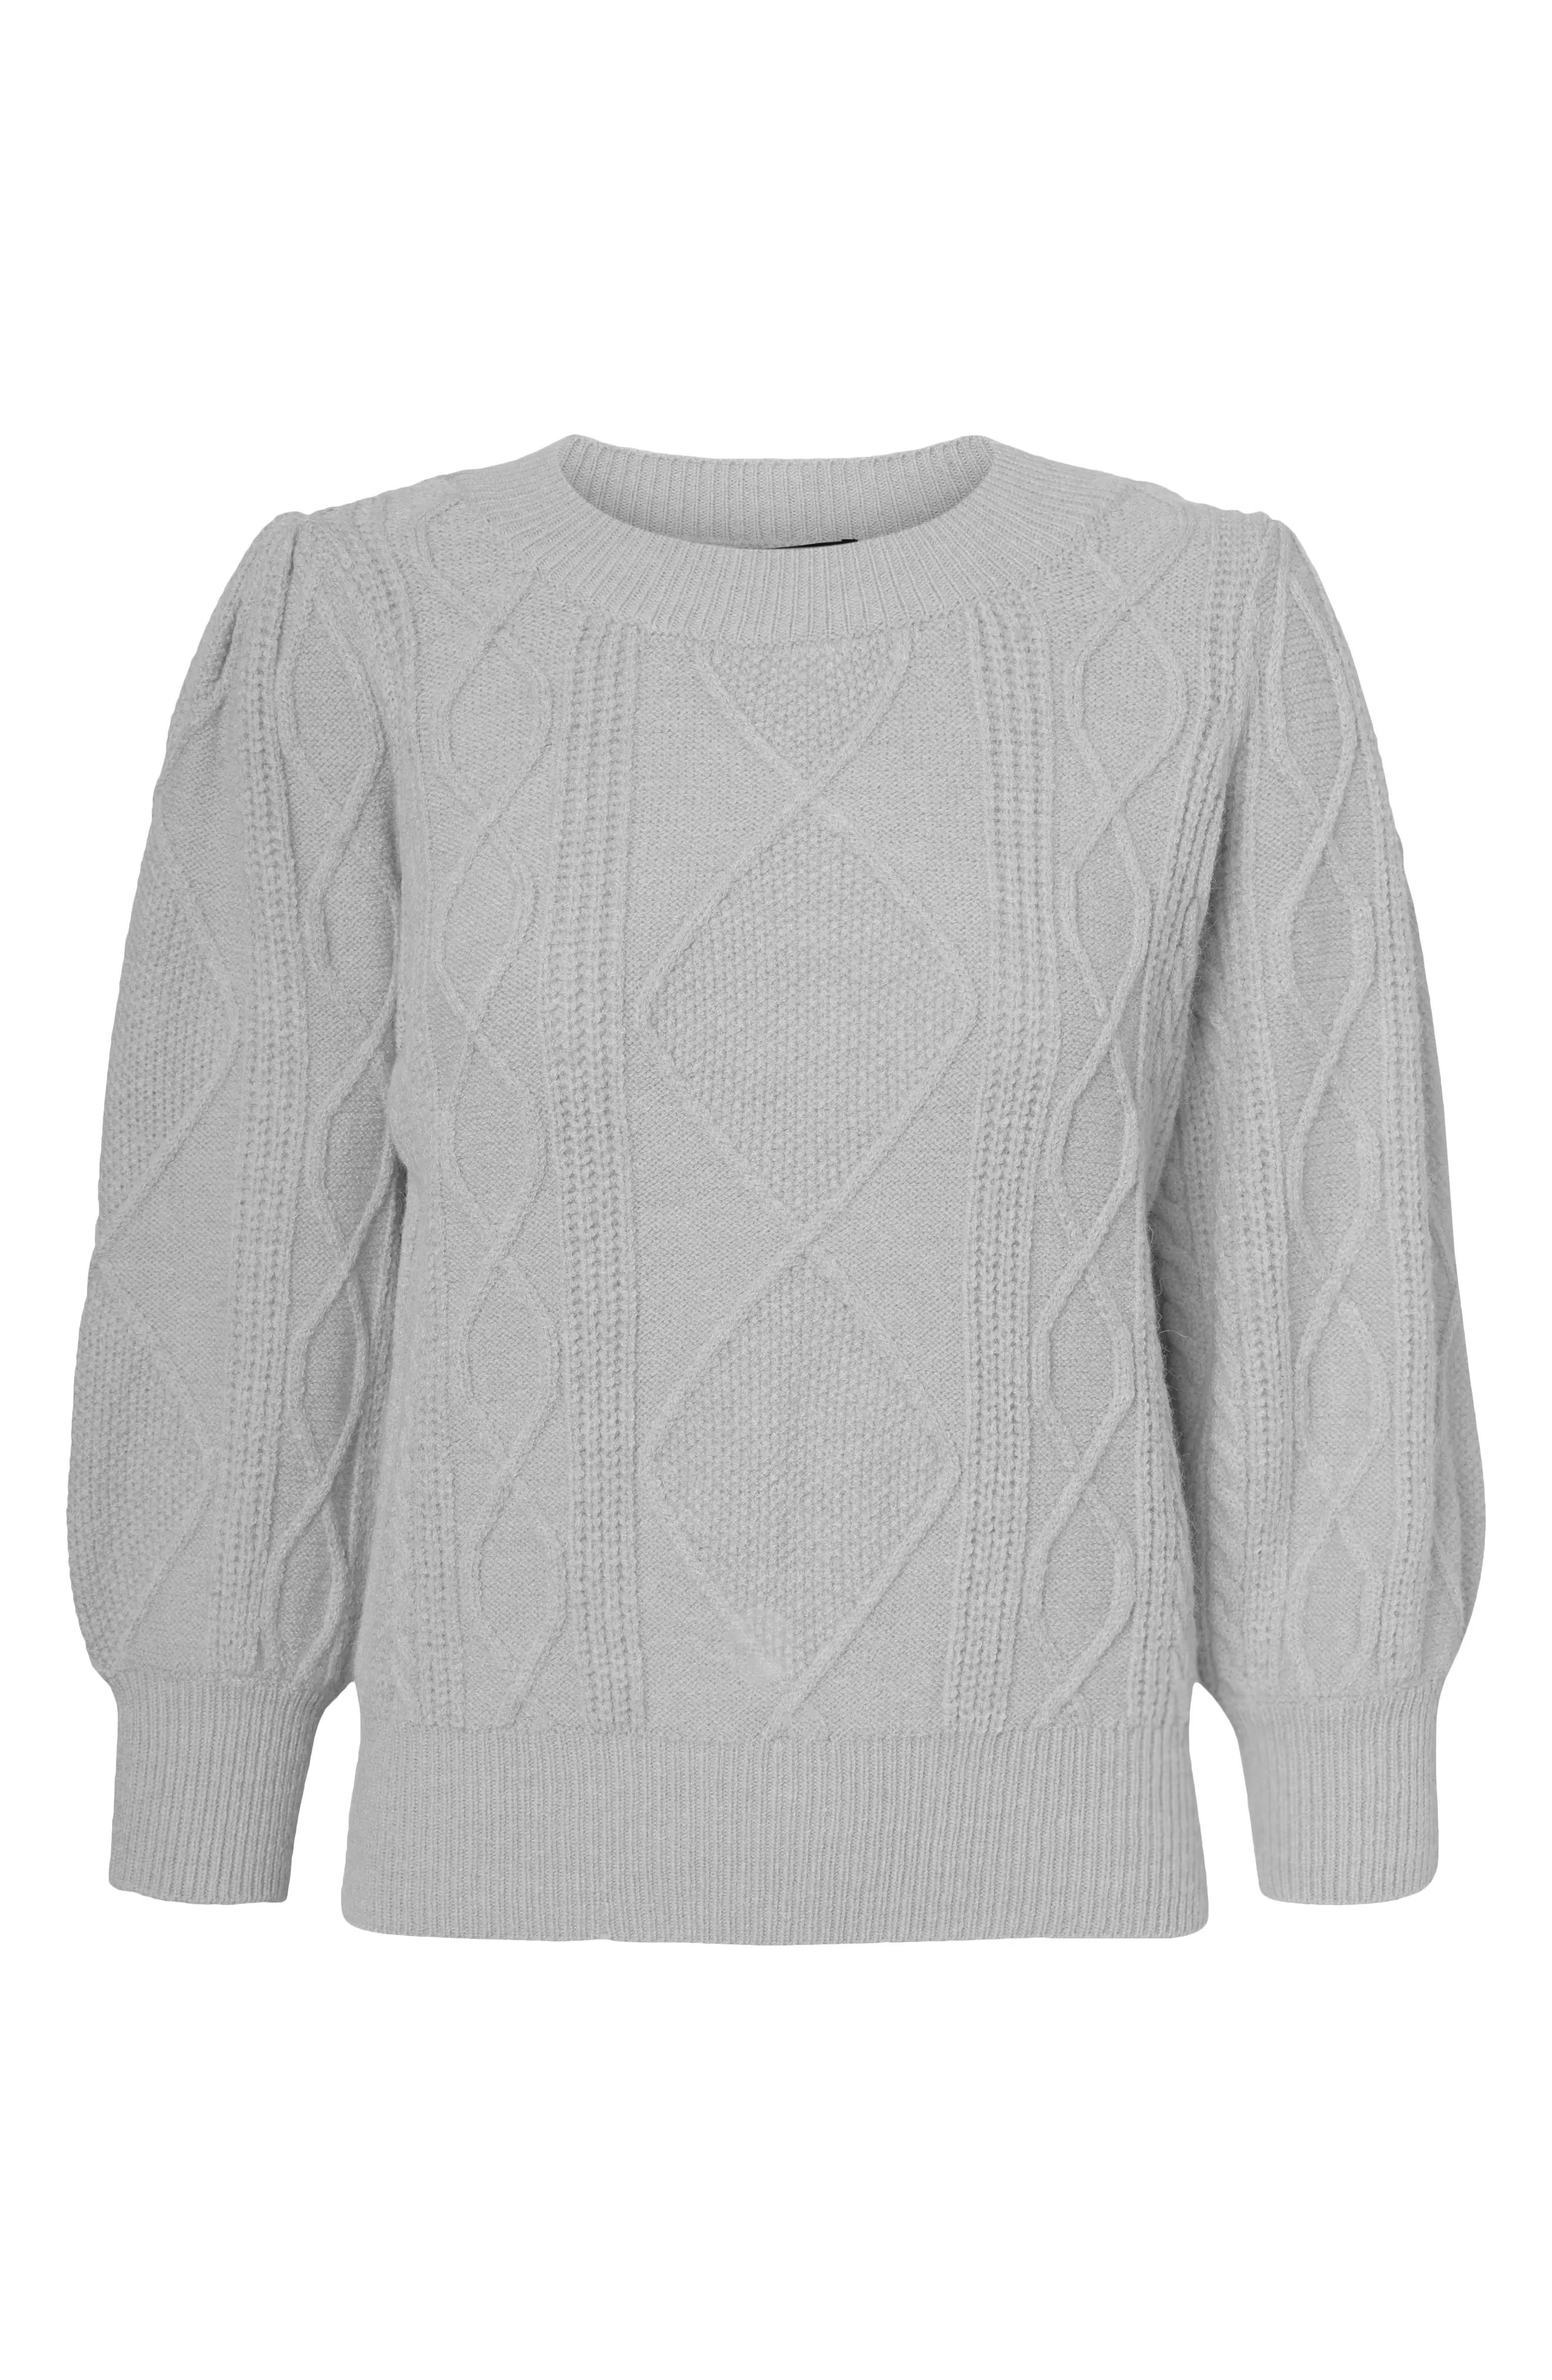 Women's Vero Moda Duda Cable Knit Sweater, Size X-Large - Grey | Nordstrom